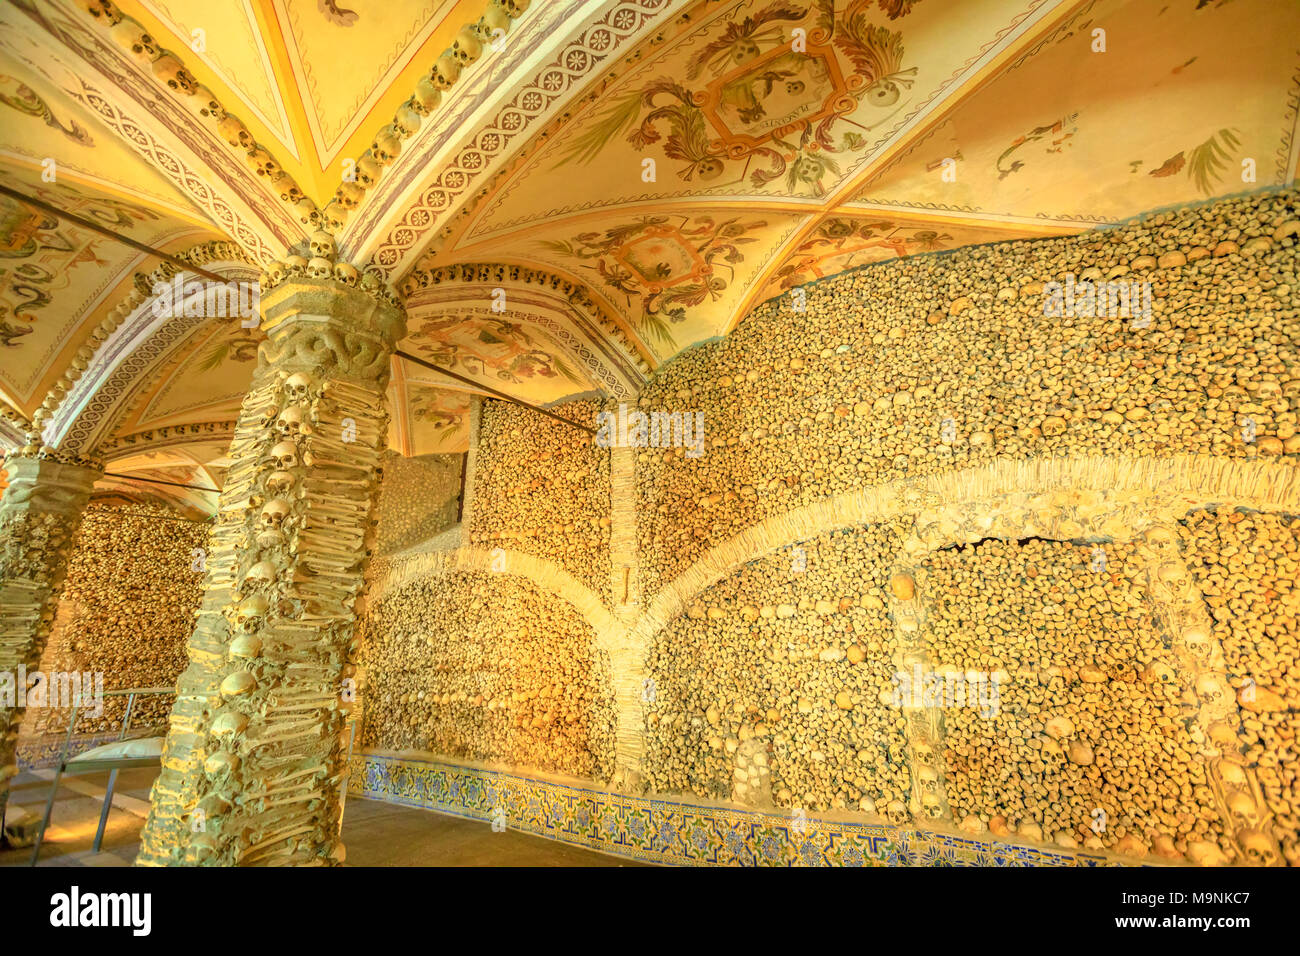 Evora, Portugal - August 18, 2017: Chapel of Bones or Capela dos Ossos, one of most visited monuments of Evora. Walls and columns adorned with human bones and skulls. Mortuary-themed painted ceiling. Stock Photo